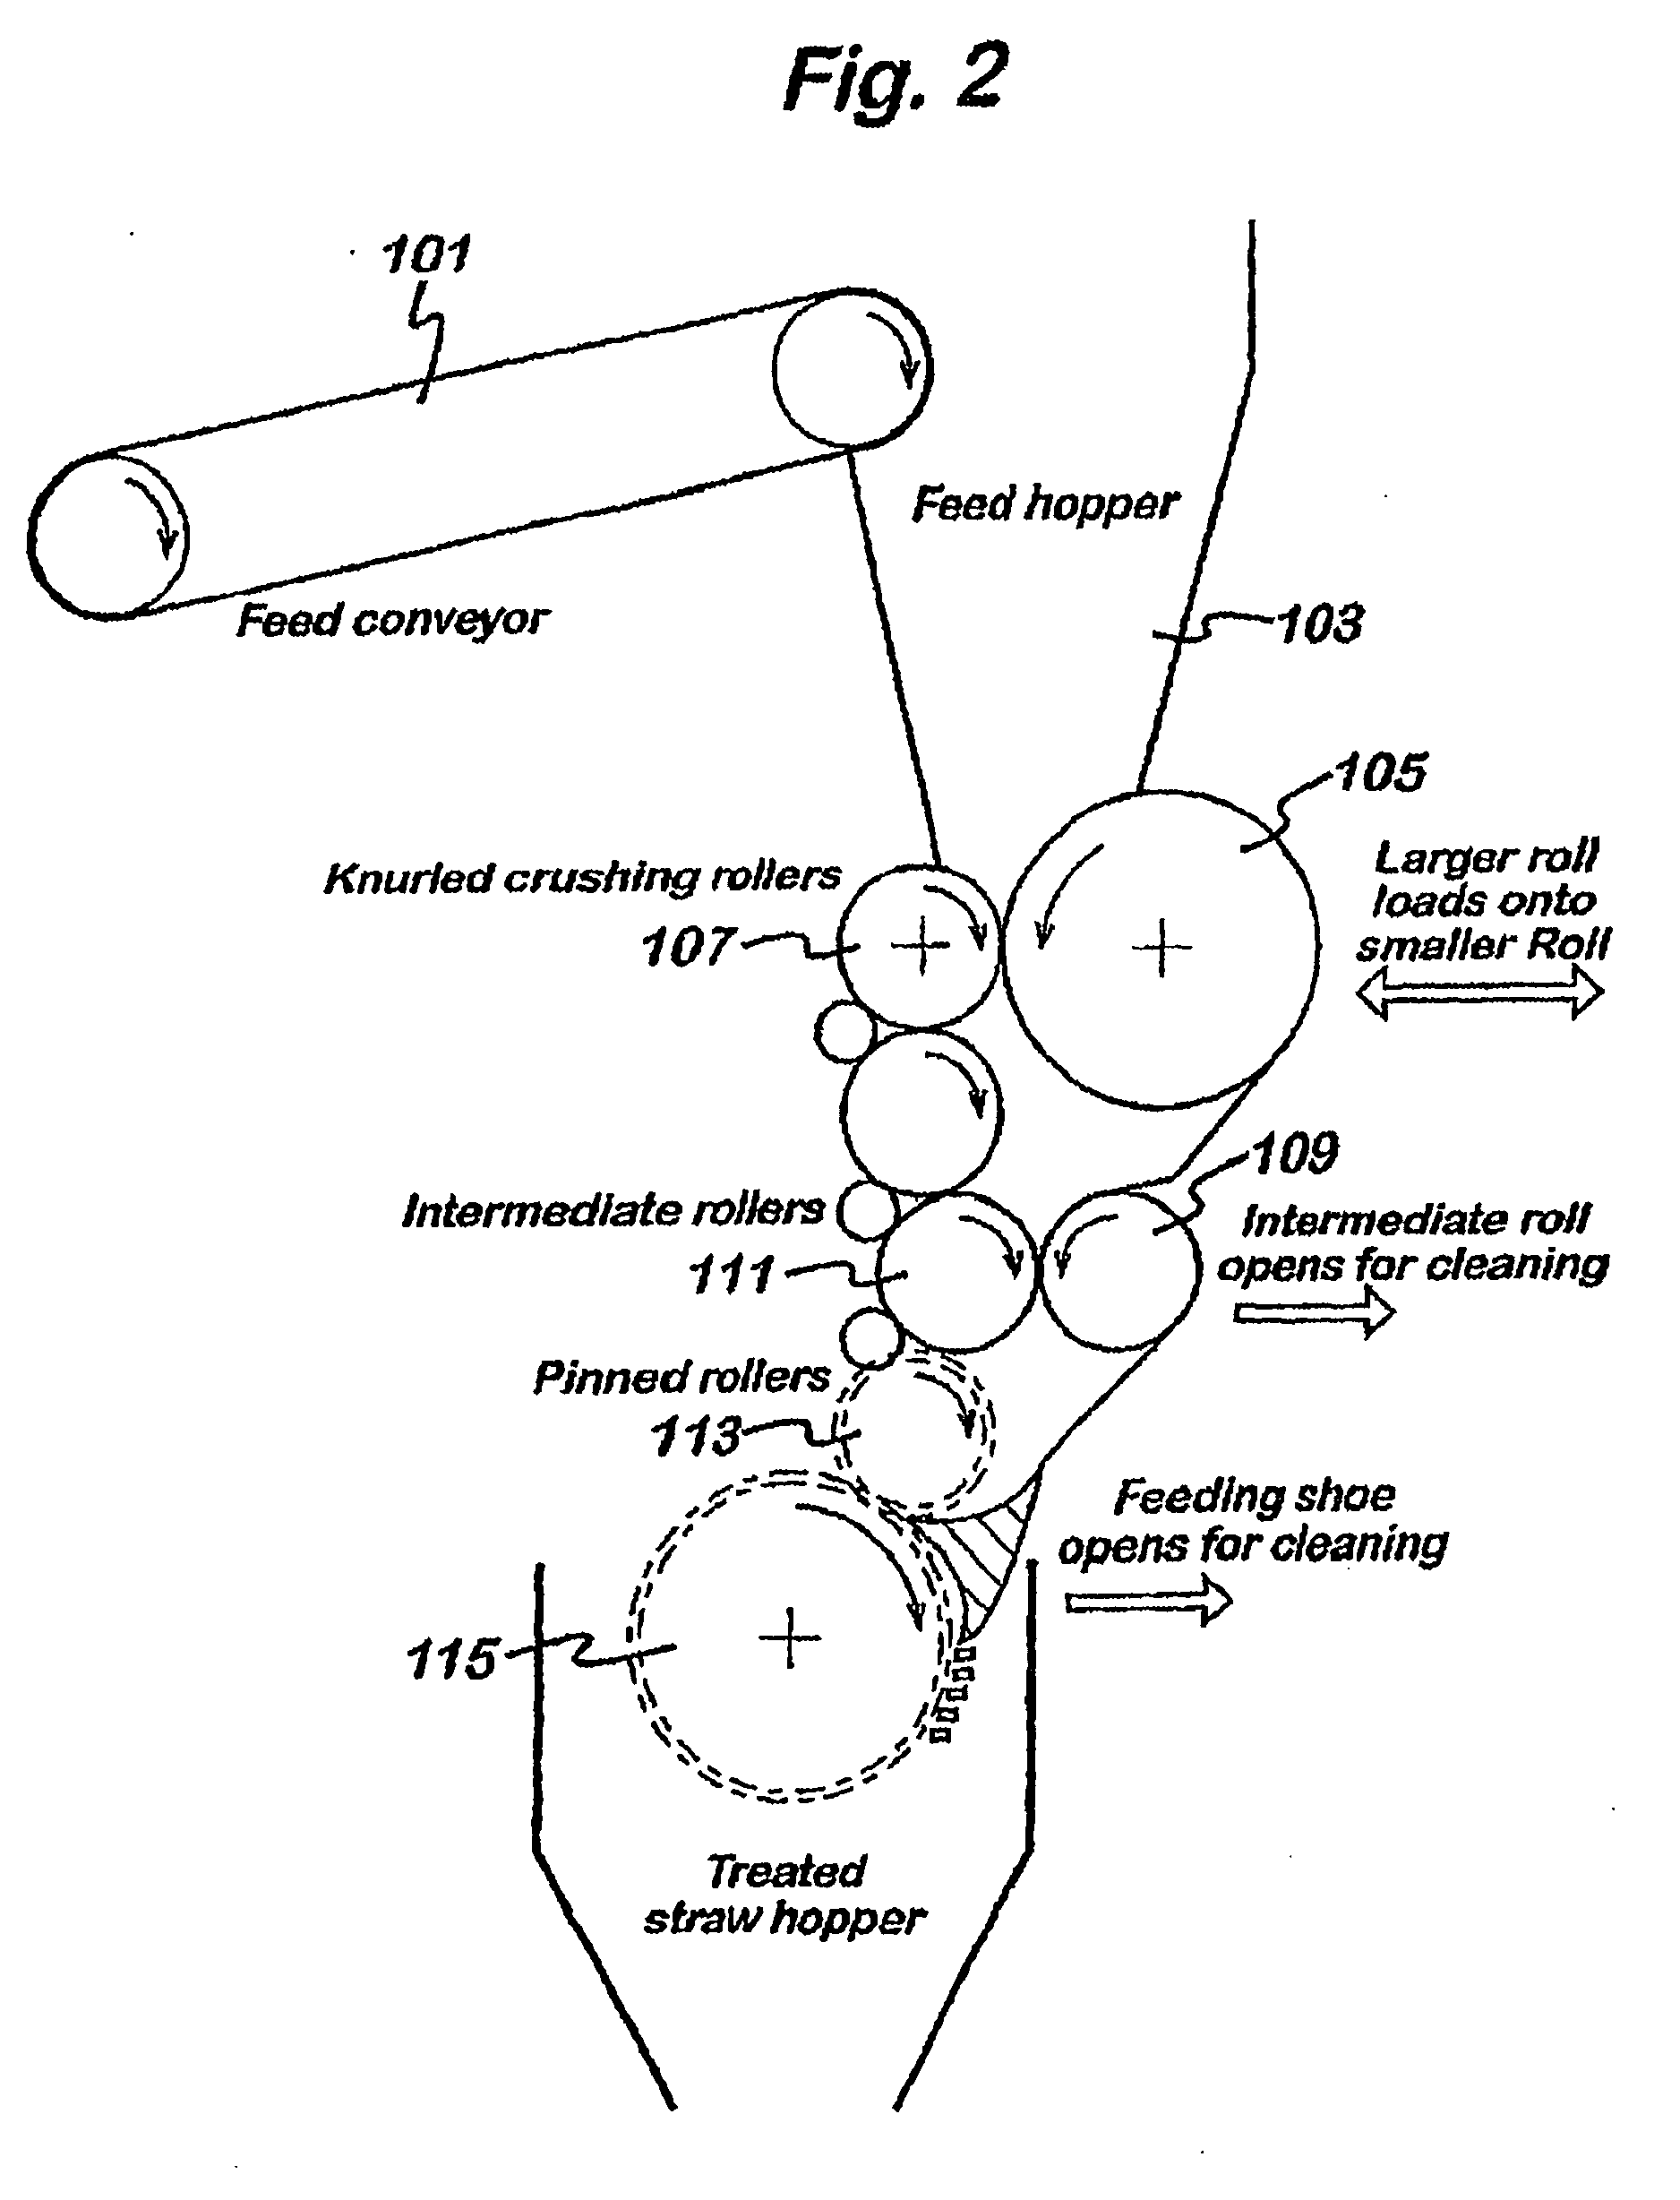 Methods for producing pulp and treating black liquor